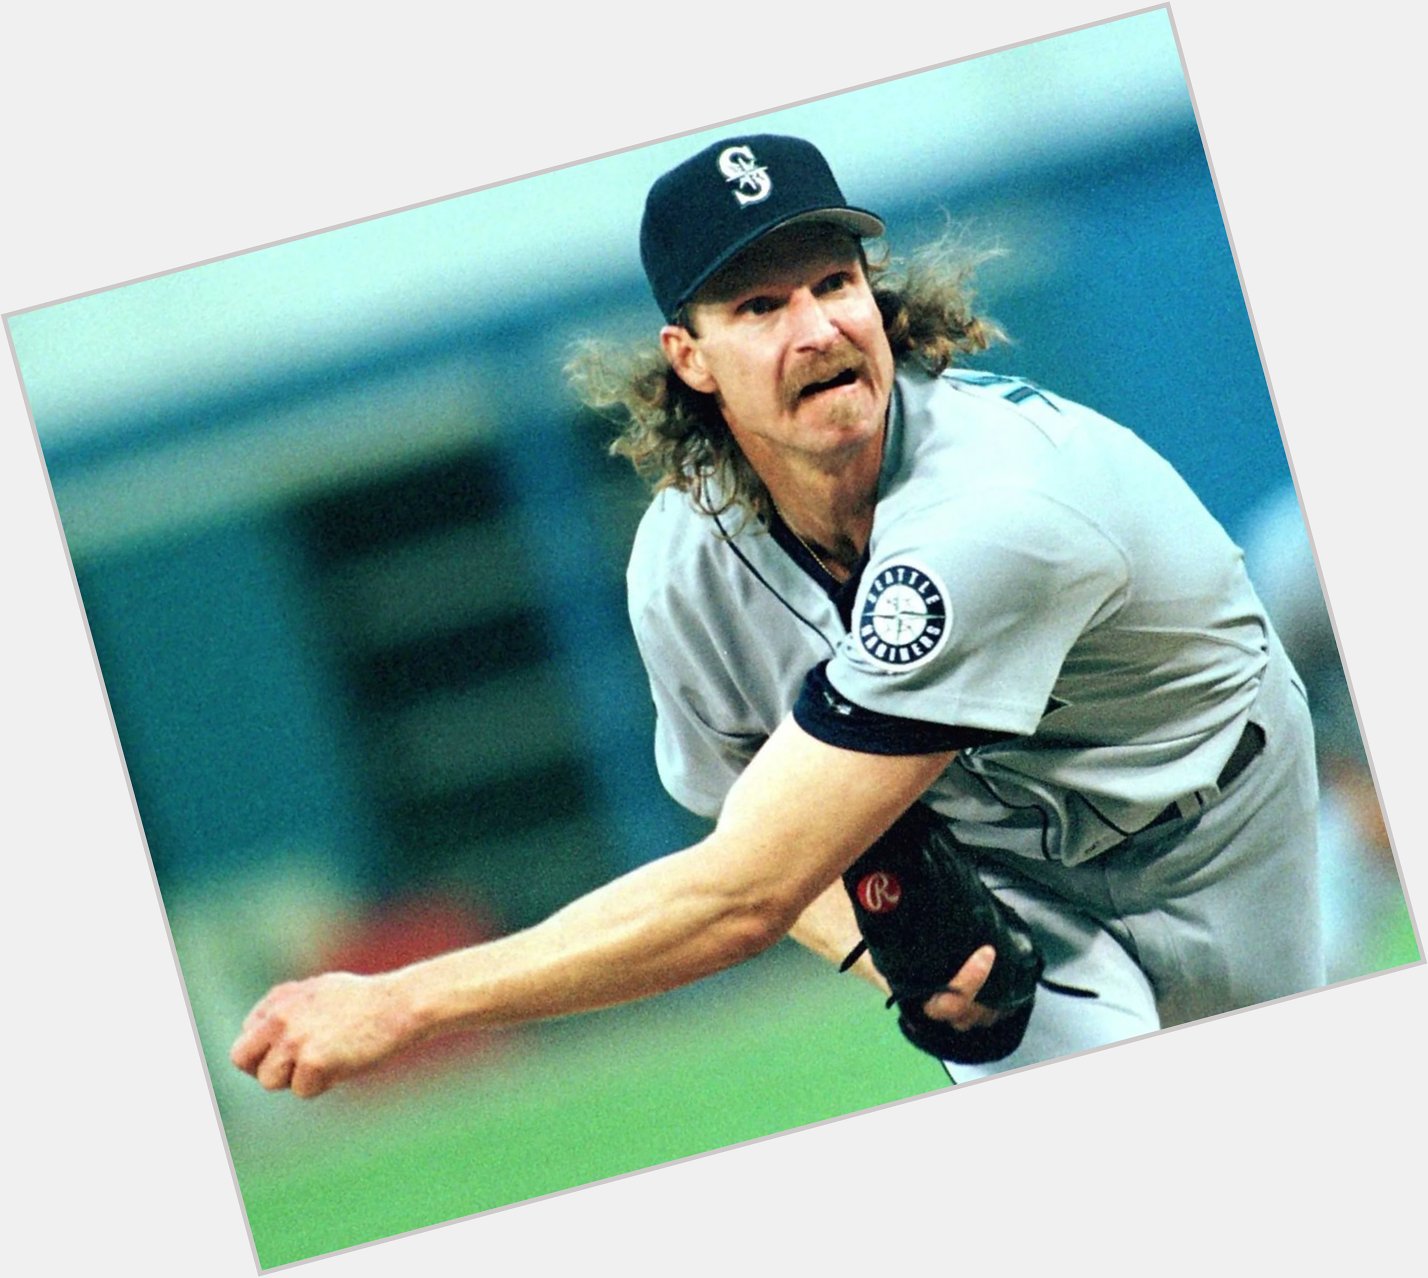 Happy Birthday to Randy Johnson! Born on this date in 1963.  